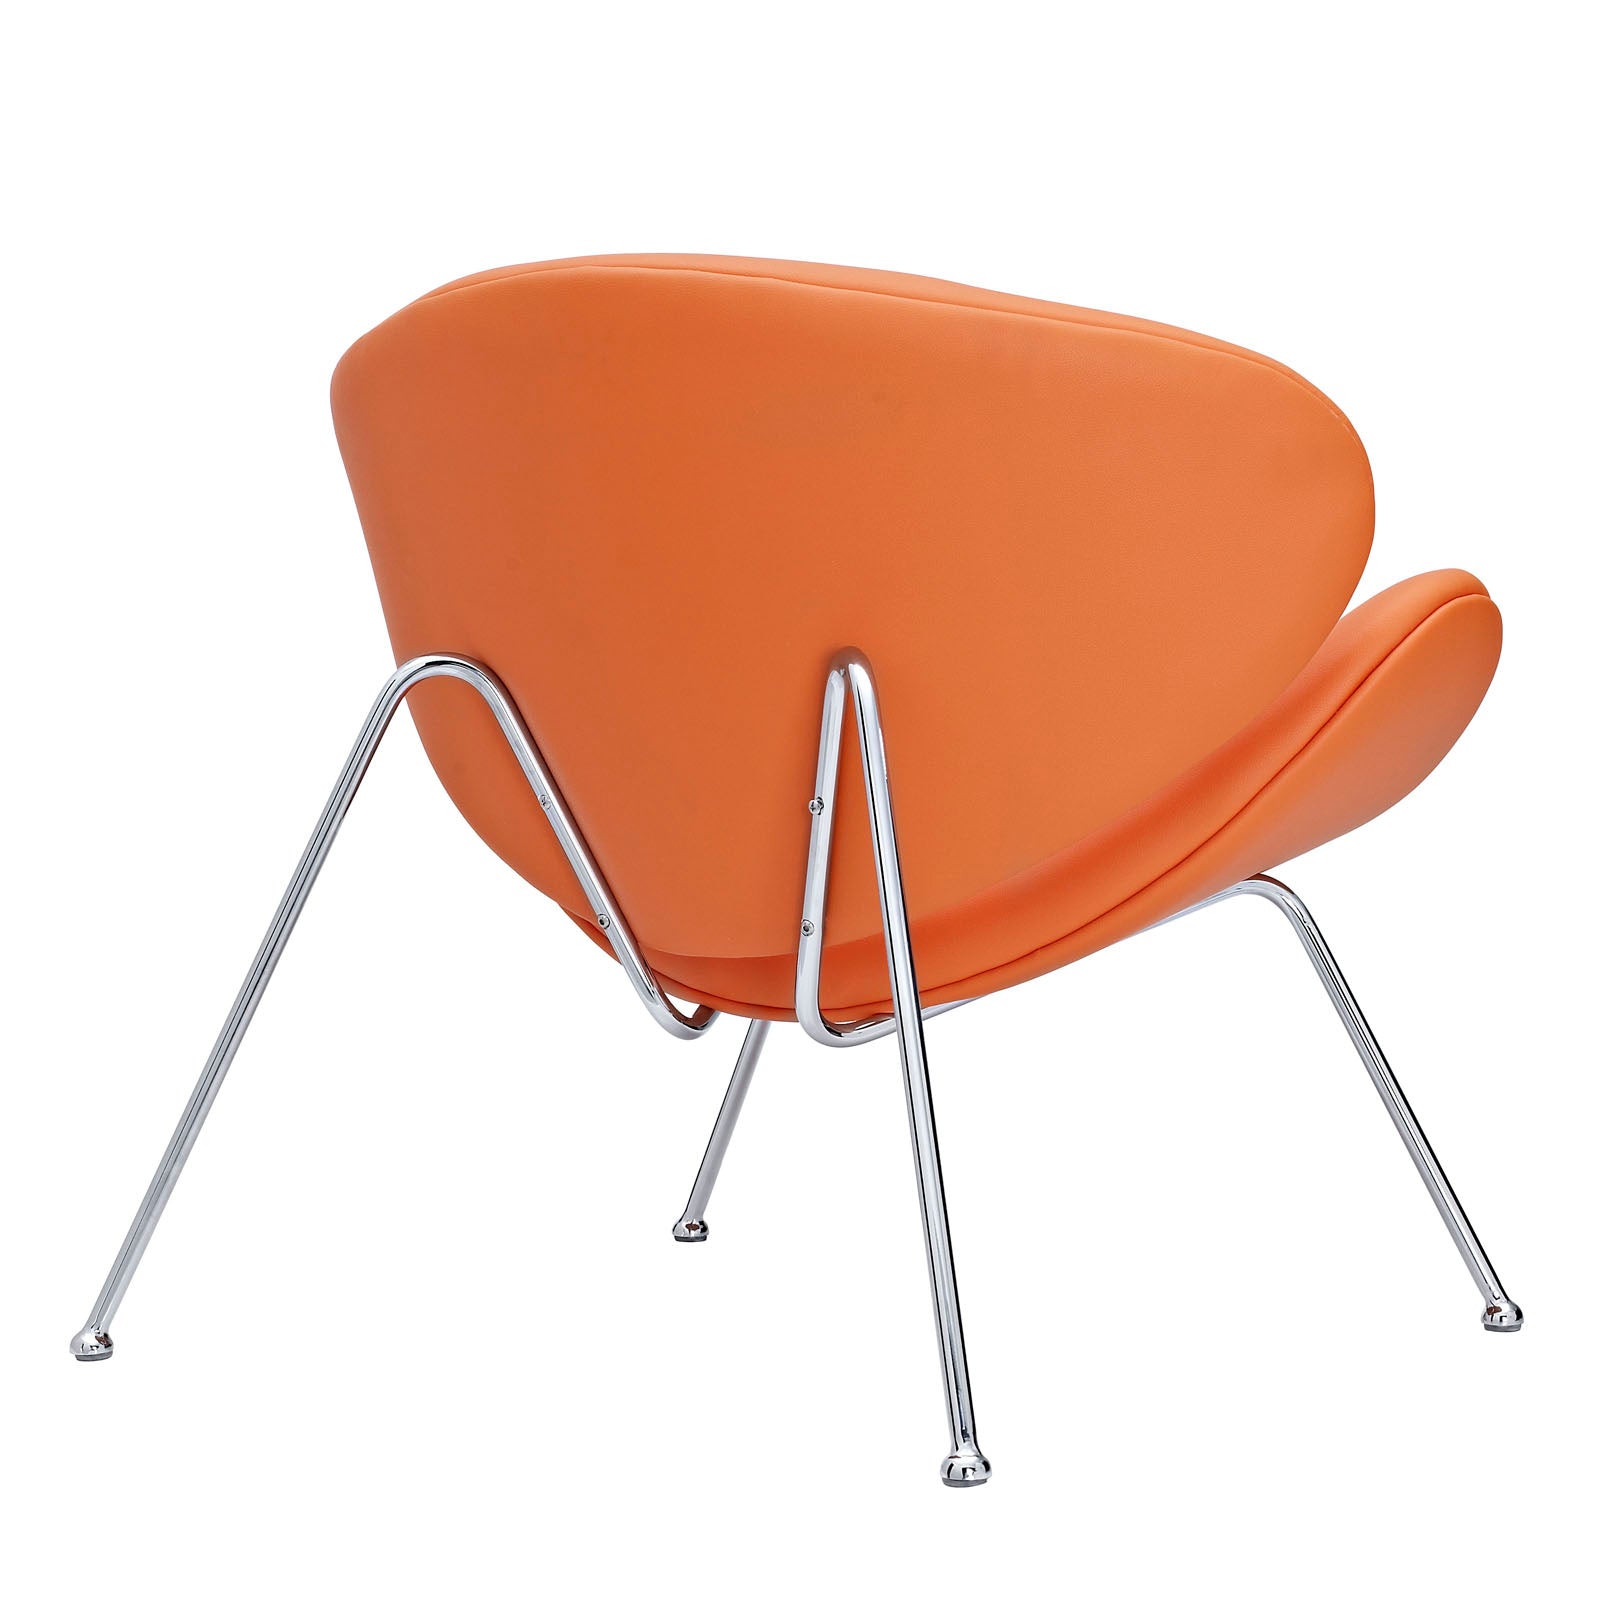 Modway Accent Chairs - Nutshell Upholstered Vinyl Lounge Chair Orange